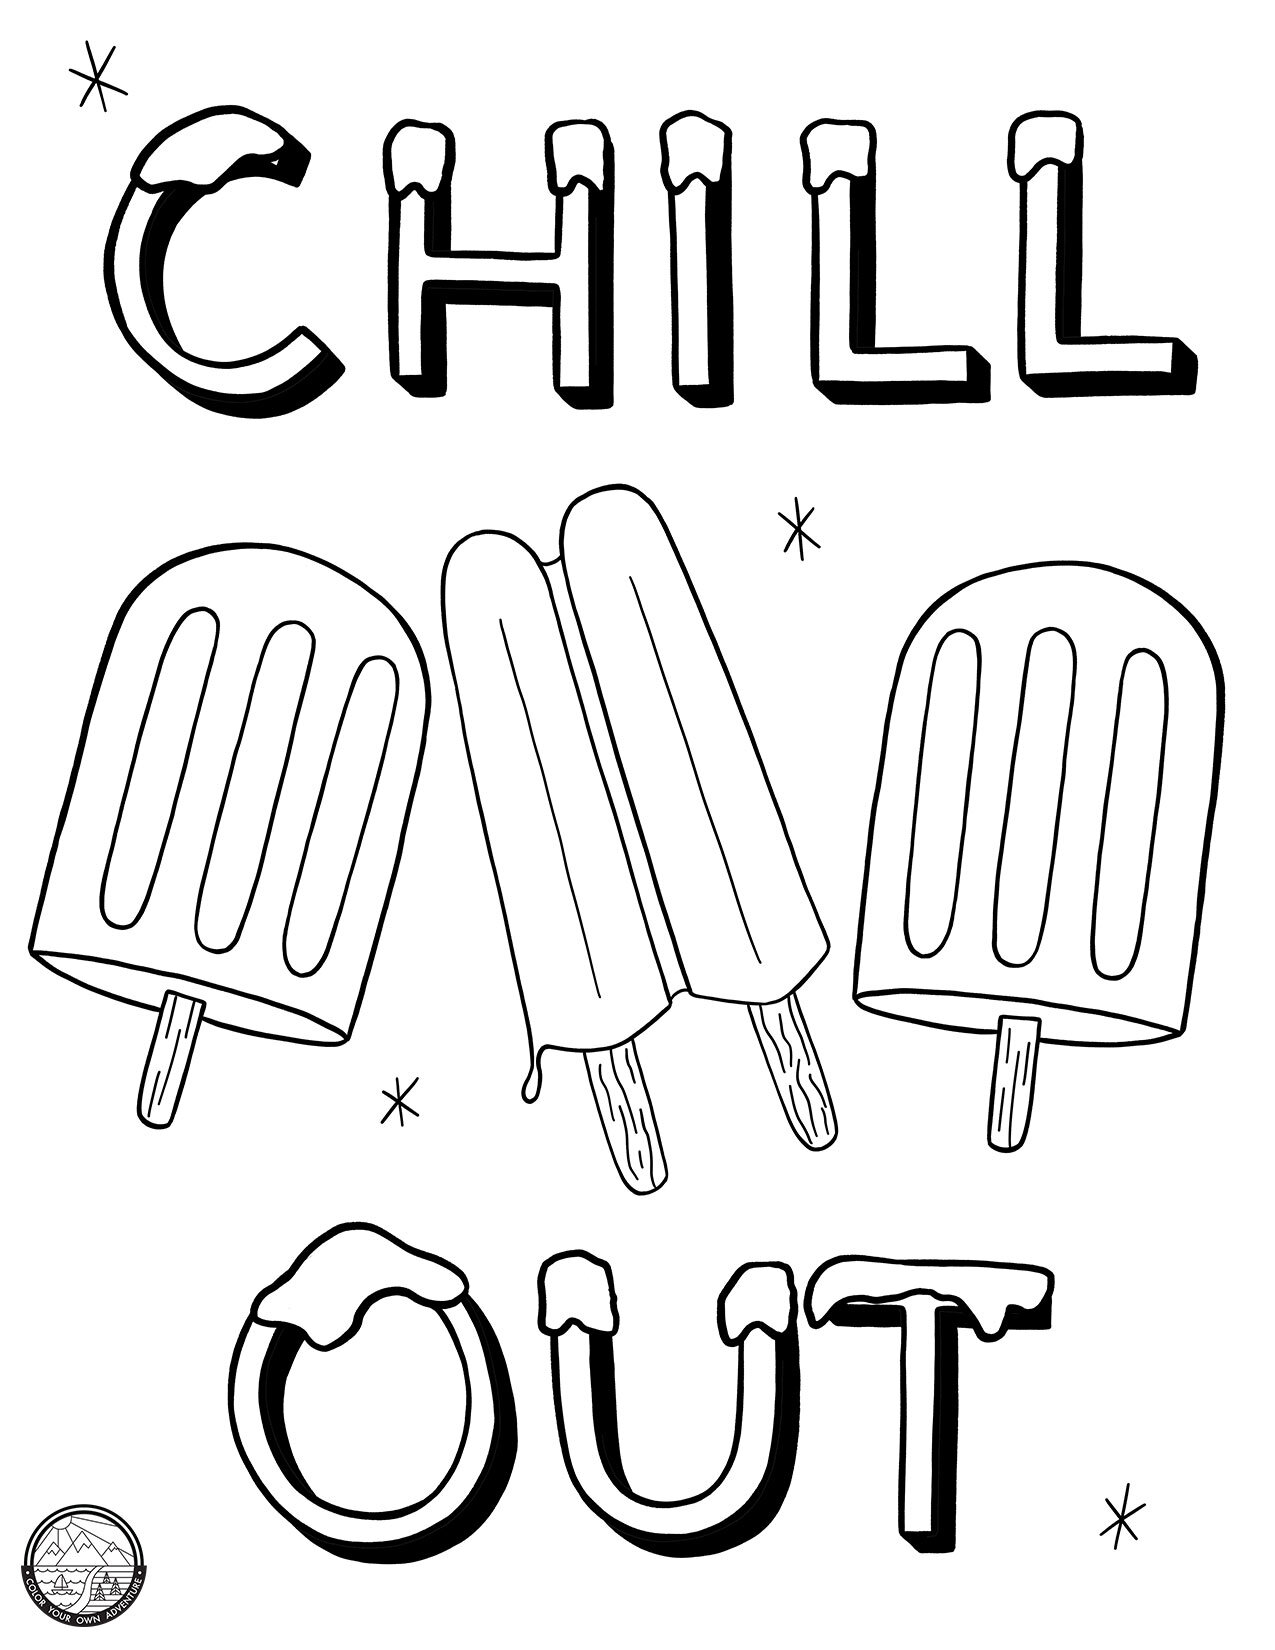 Chill Out Coloring Page